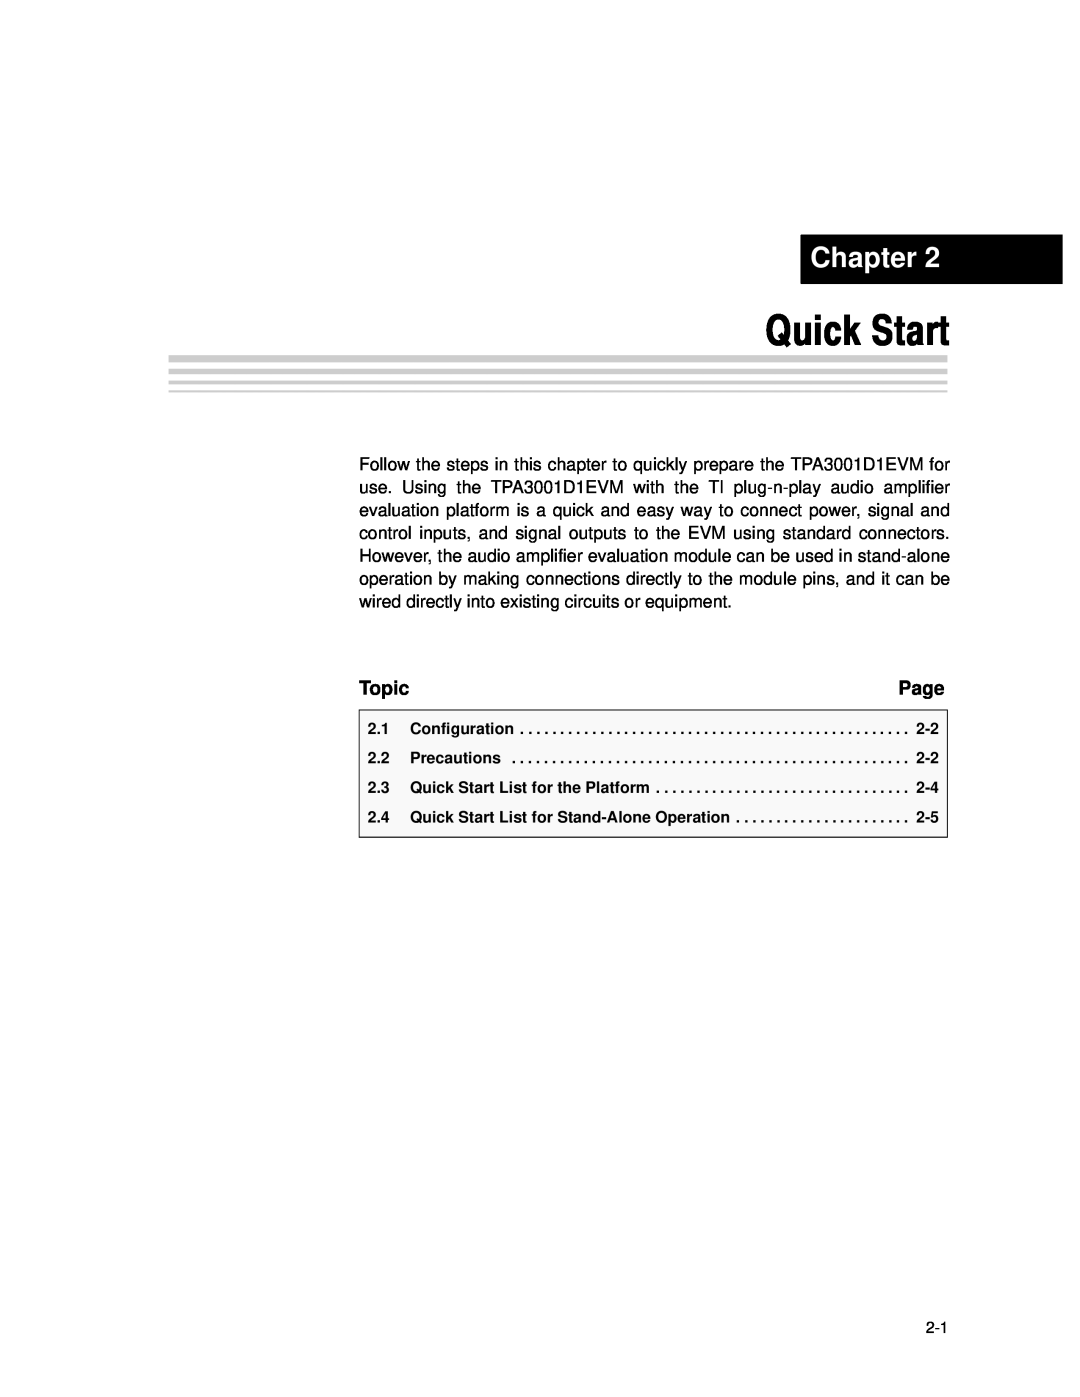 Texas Instruments TPA3001D1EVM manual Quick Start, Chapter, Page, Topic 